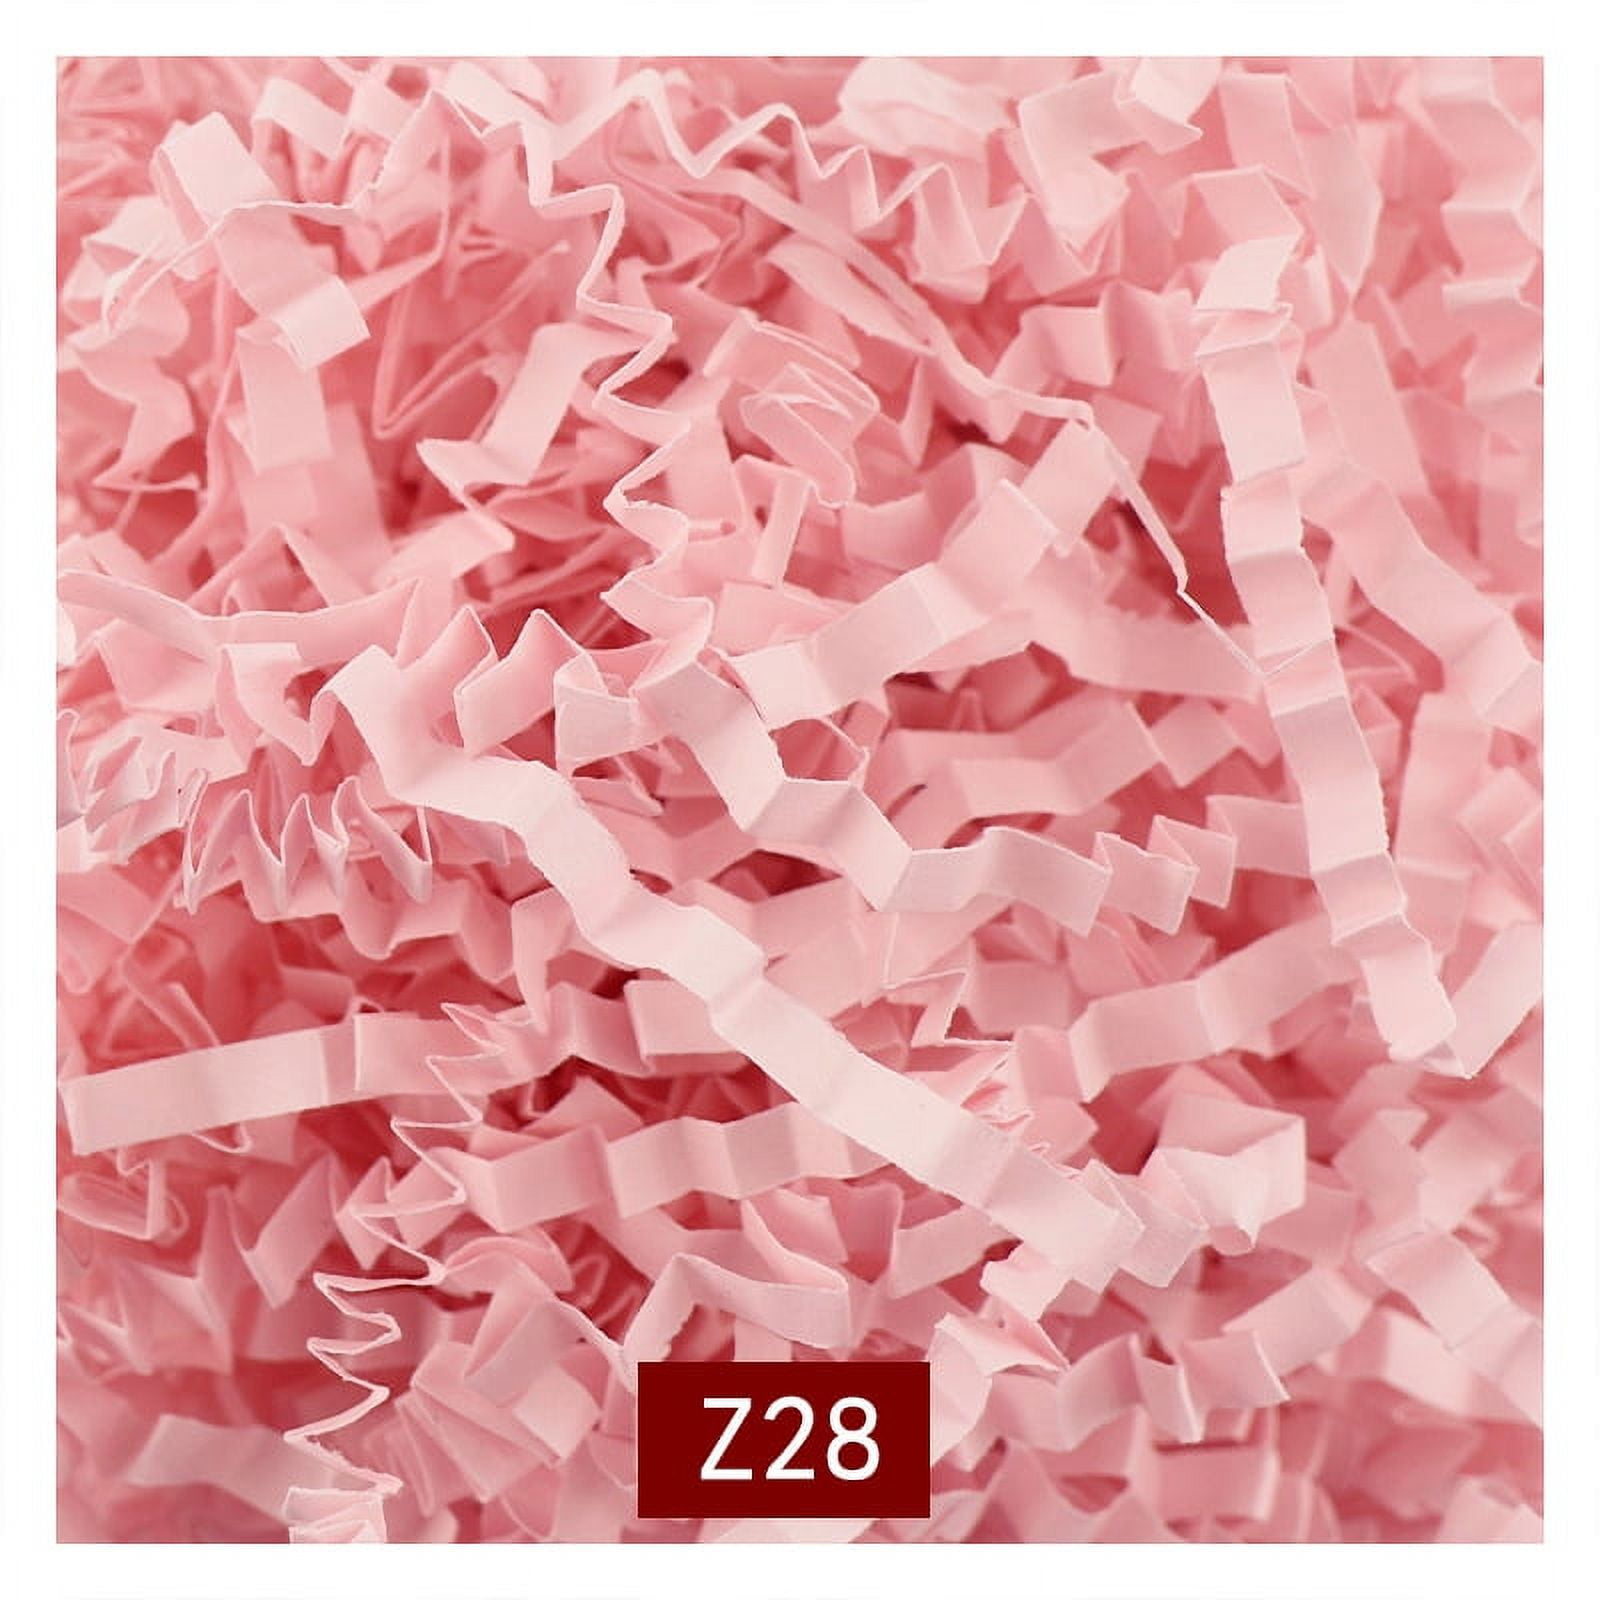 Essentials by Leisure Arts Crinkle Shred Box, Light Pink, 10lbs Shredded  Paper Filler, Crinkle Cut Paper Shred Filler, Box Filler, Shredded Paper  for Gift Box, Paper Crinkle Filler, Box Filling